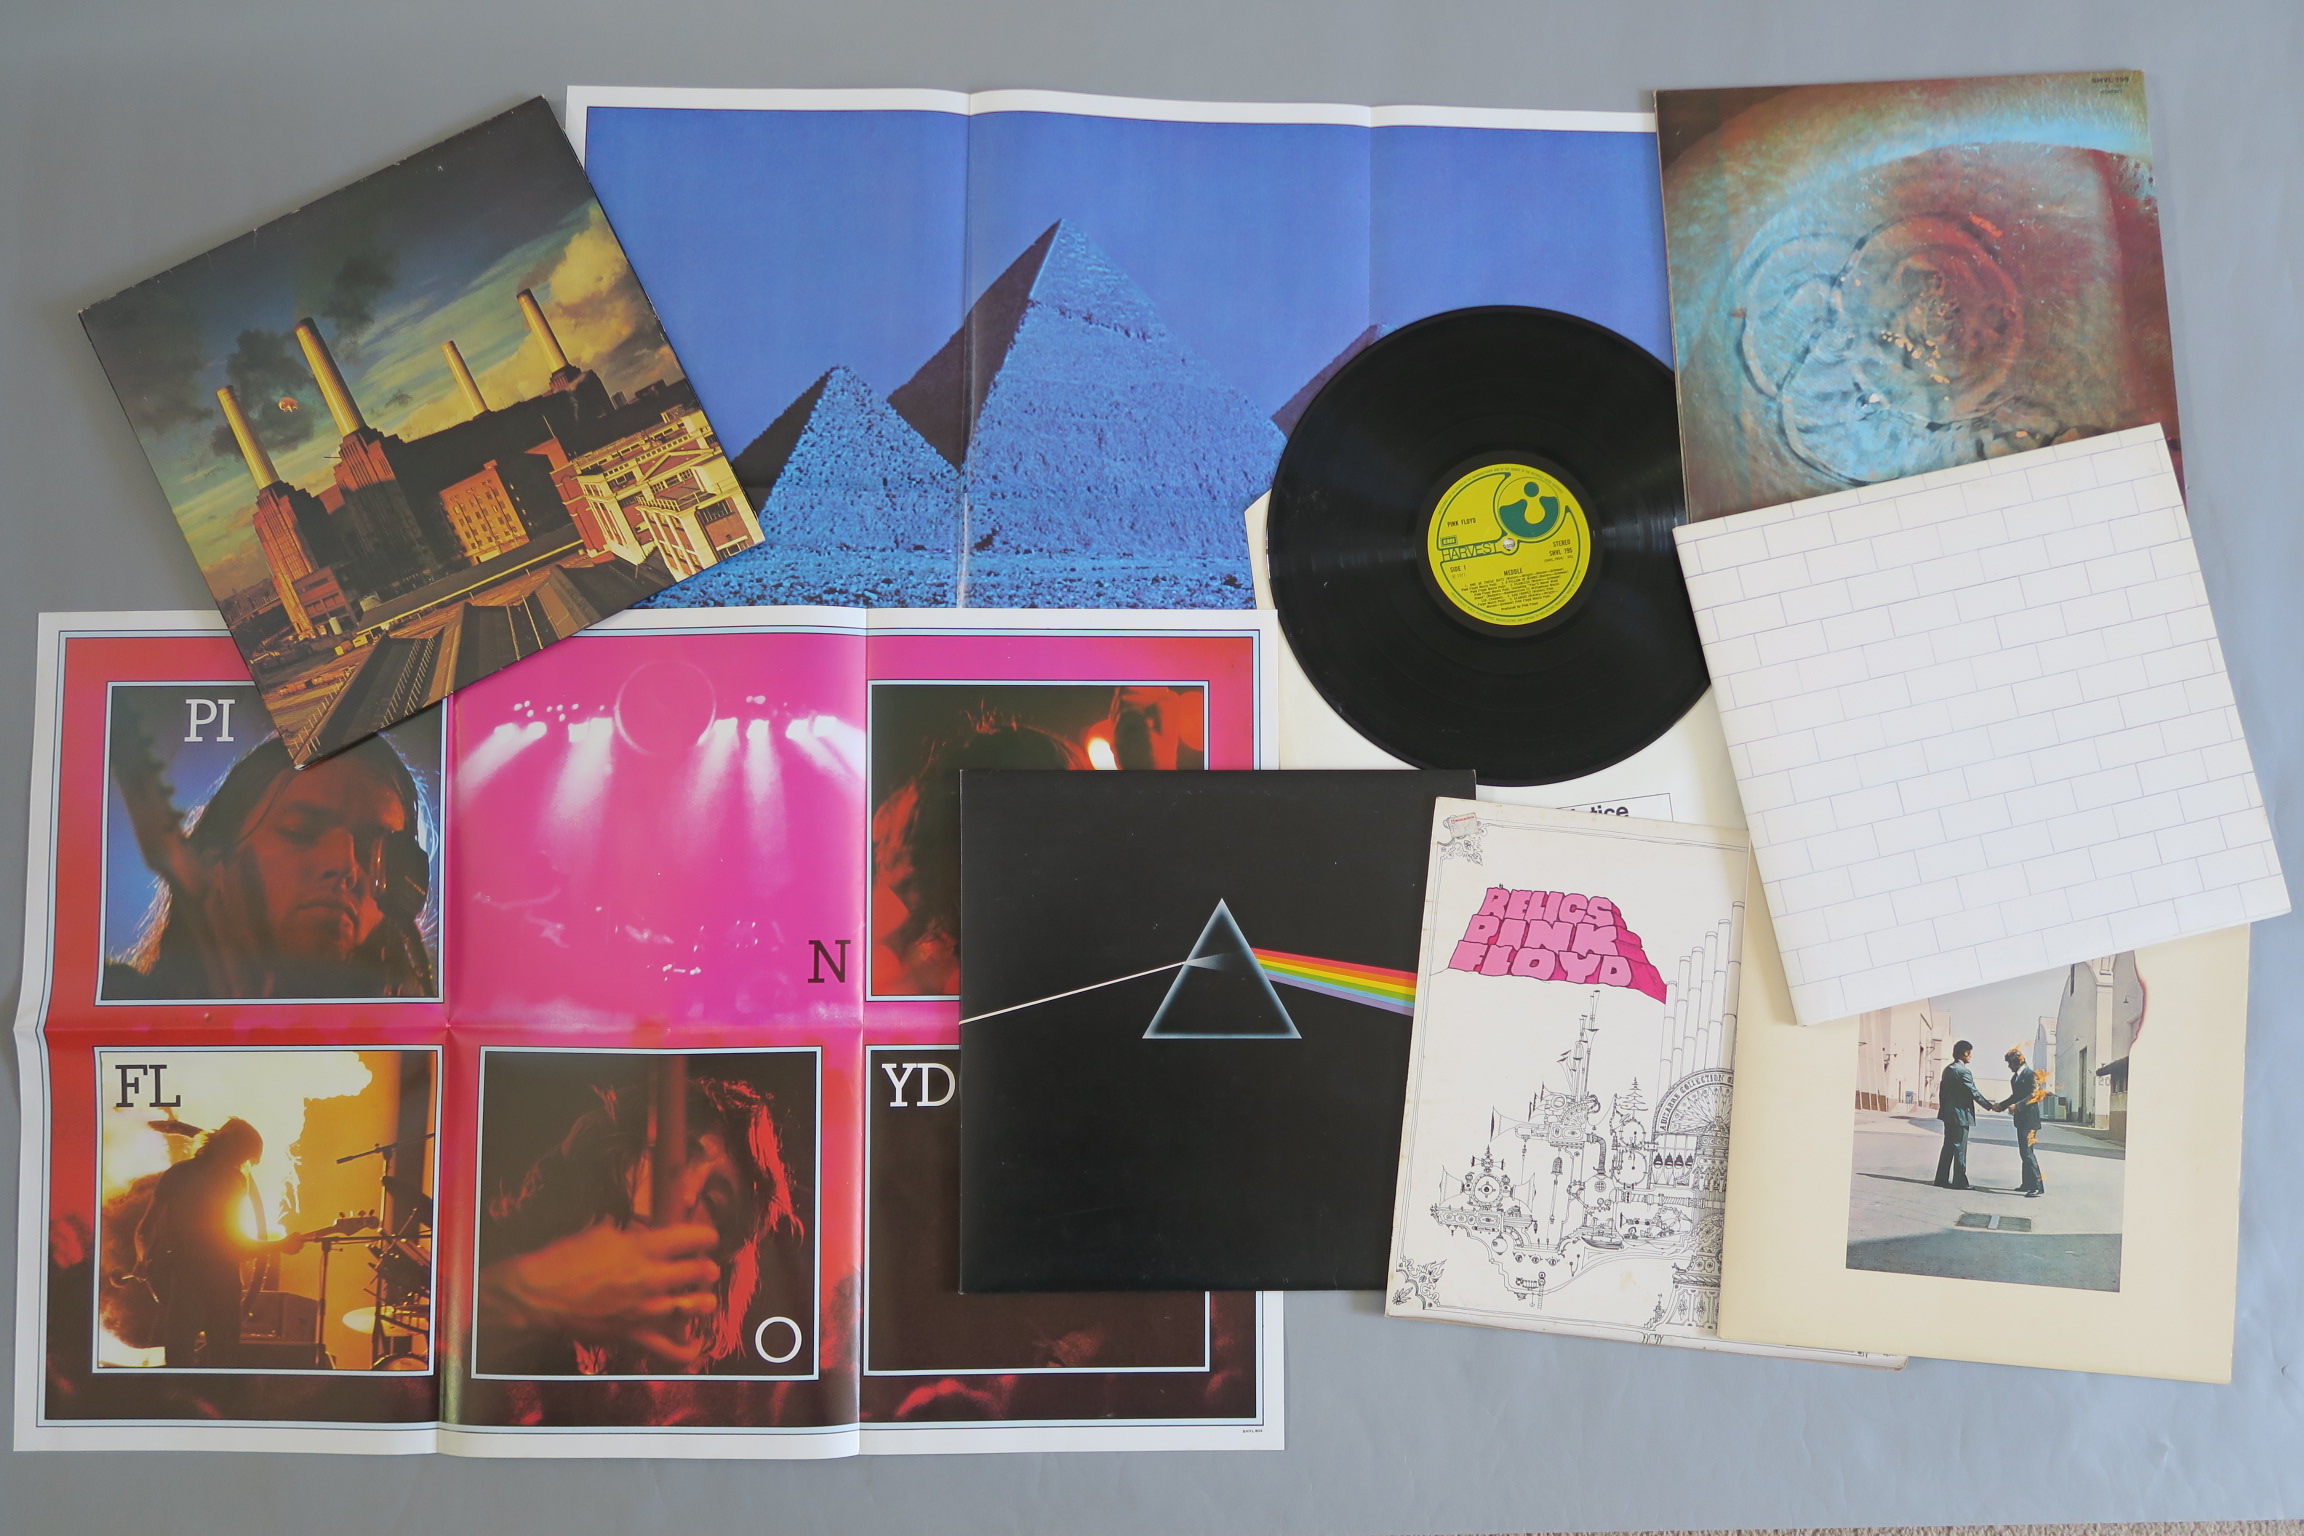 Pink Floyd vinyl LP records Meddle, Dark side of the Moon, The Wall, Wish you were here, Relics, and